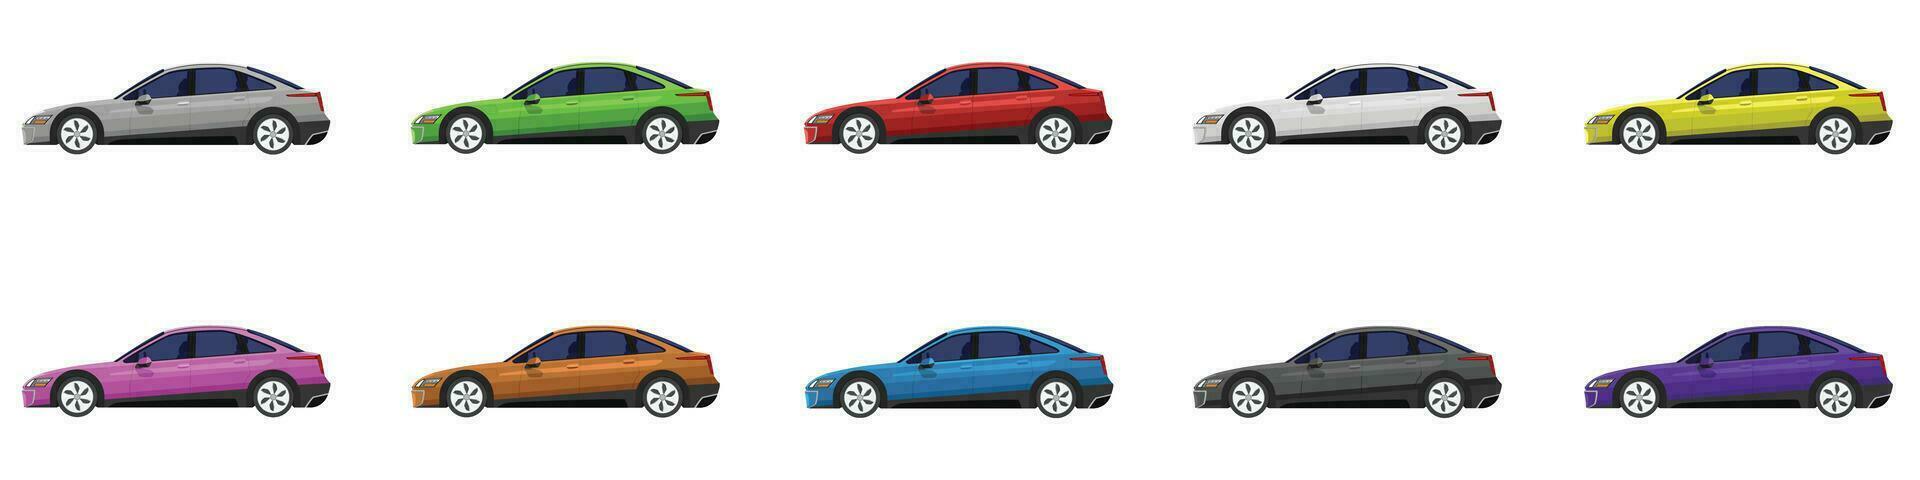 Vector or Illustrator of sedan cars colorful collection. Design of electric vehicles car. Colorful cars with separate layers. On isolated white background.